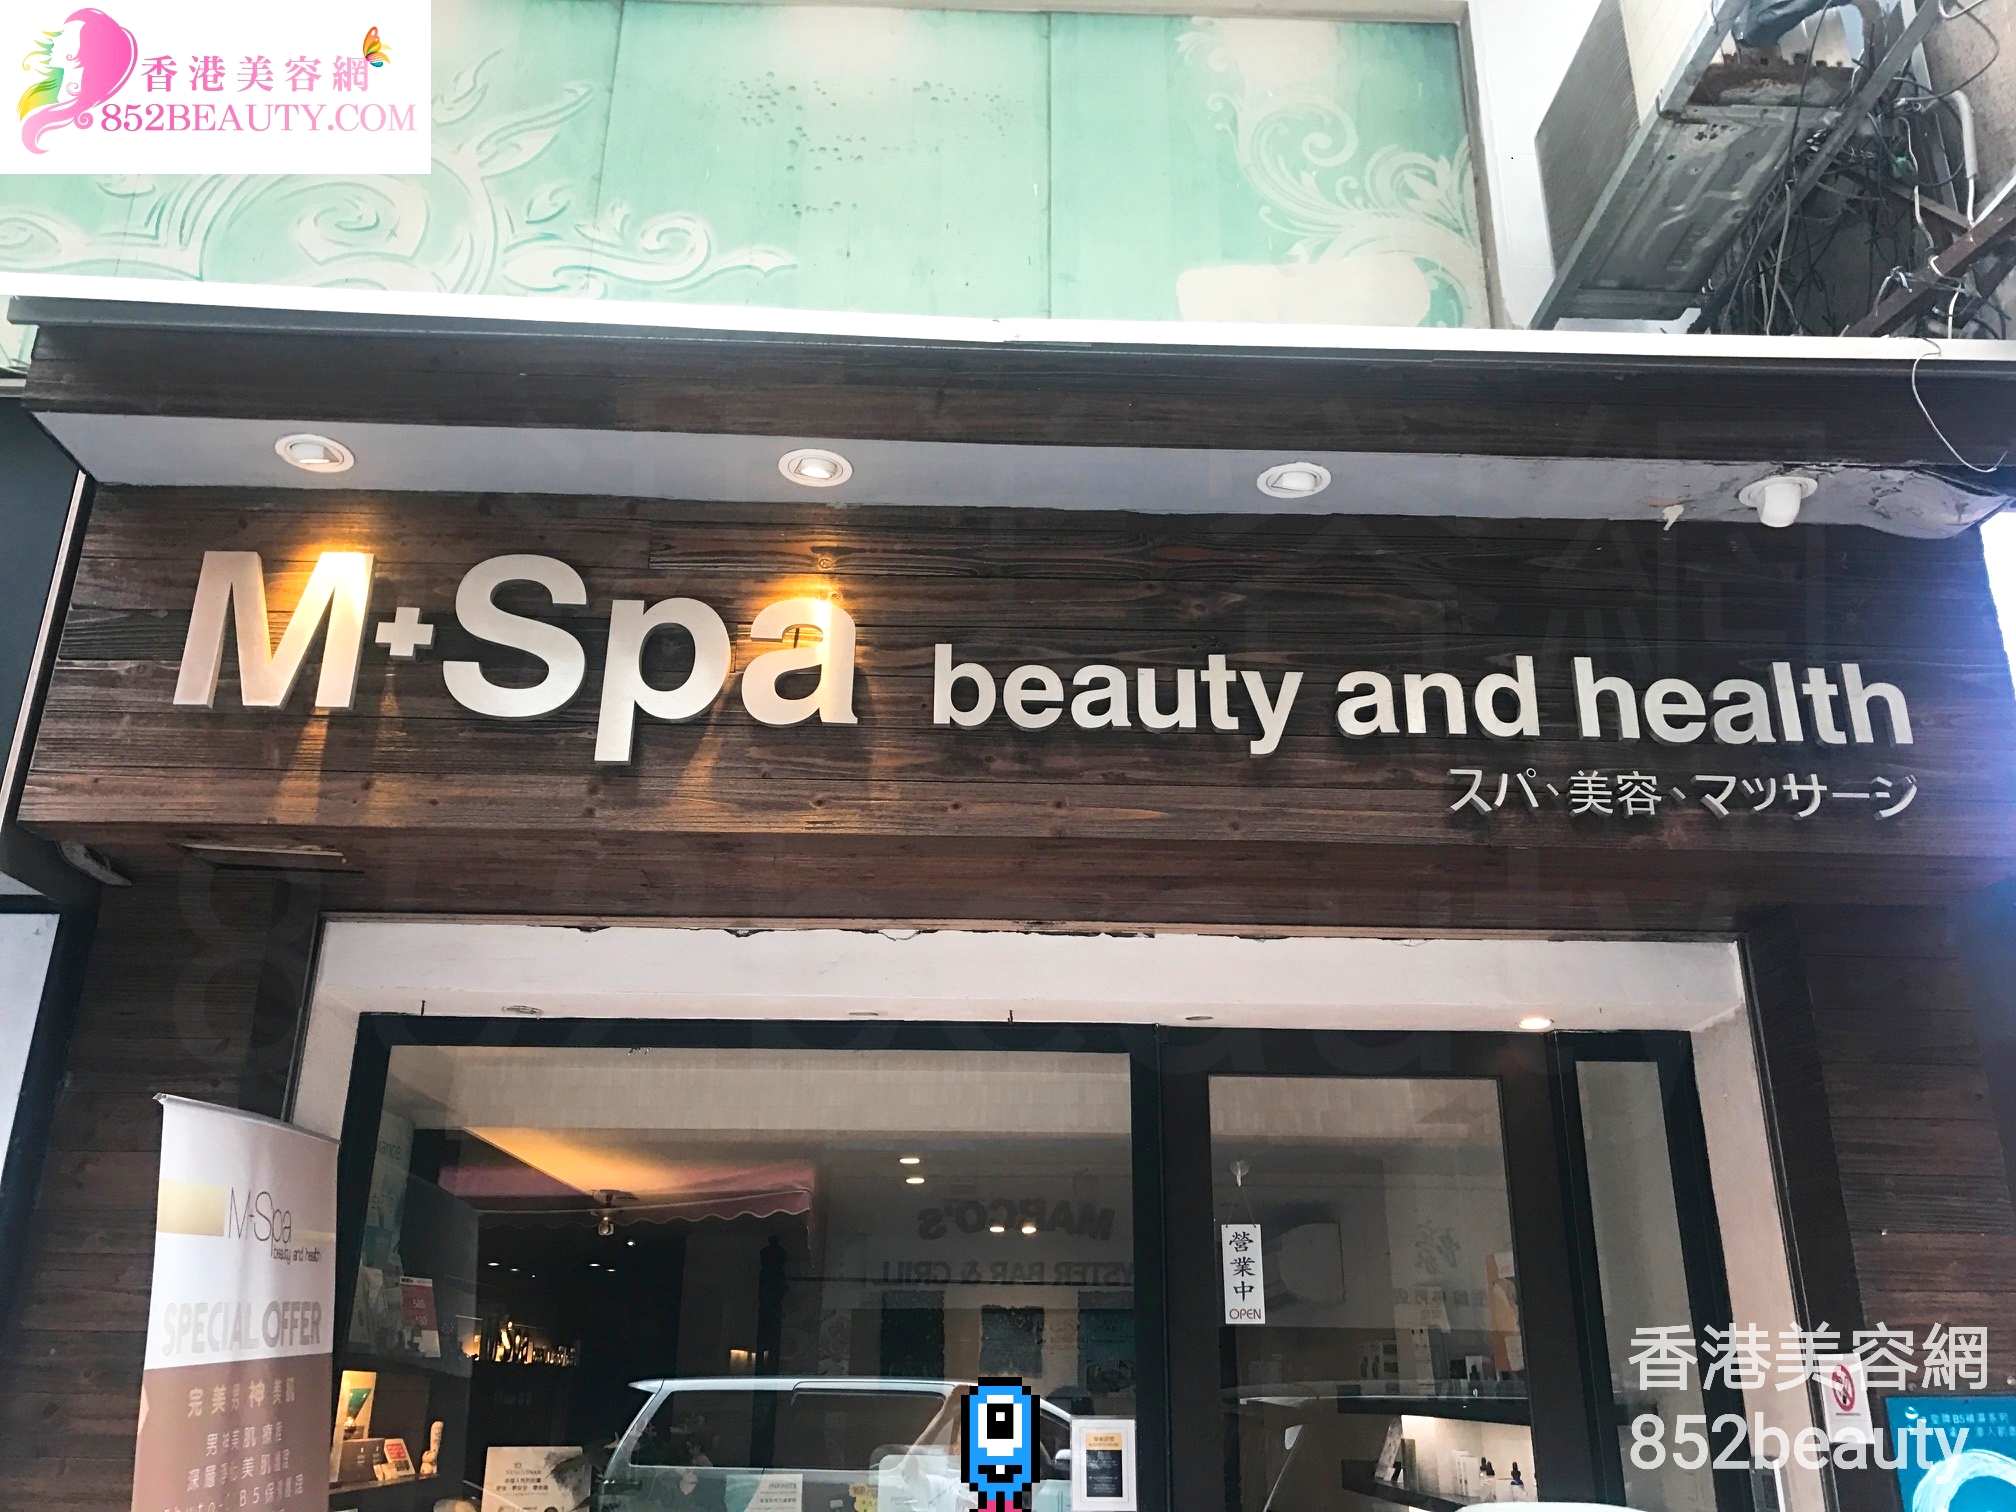 Facial Care: M+Spa beauty and health